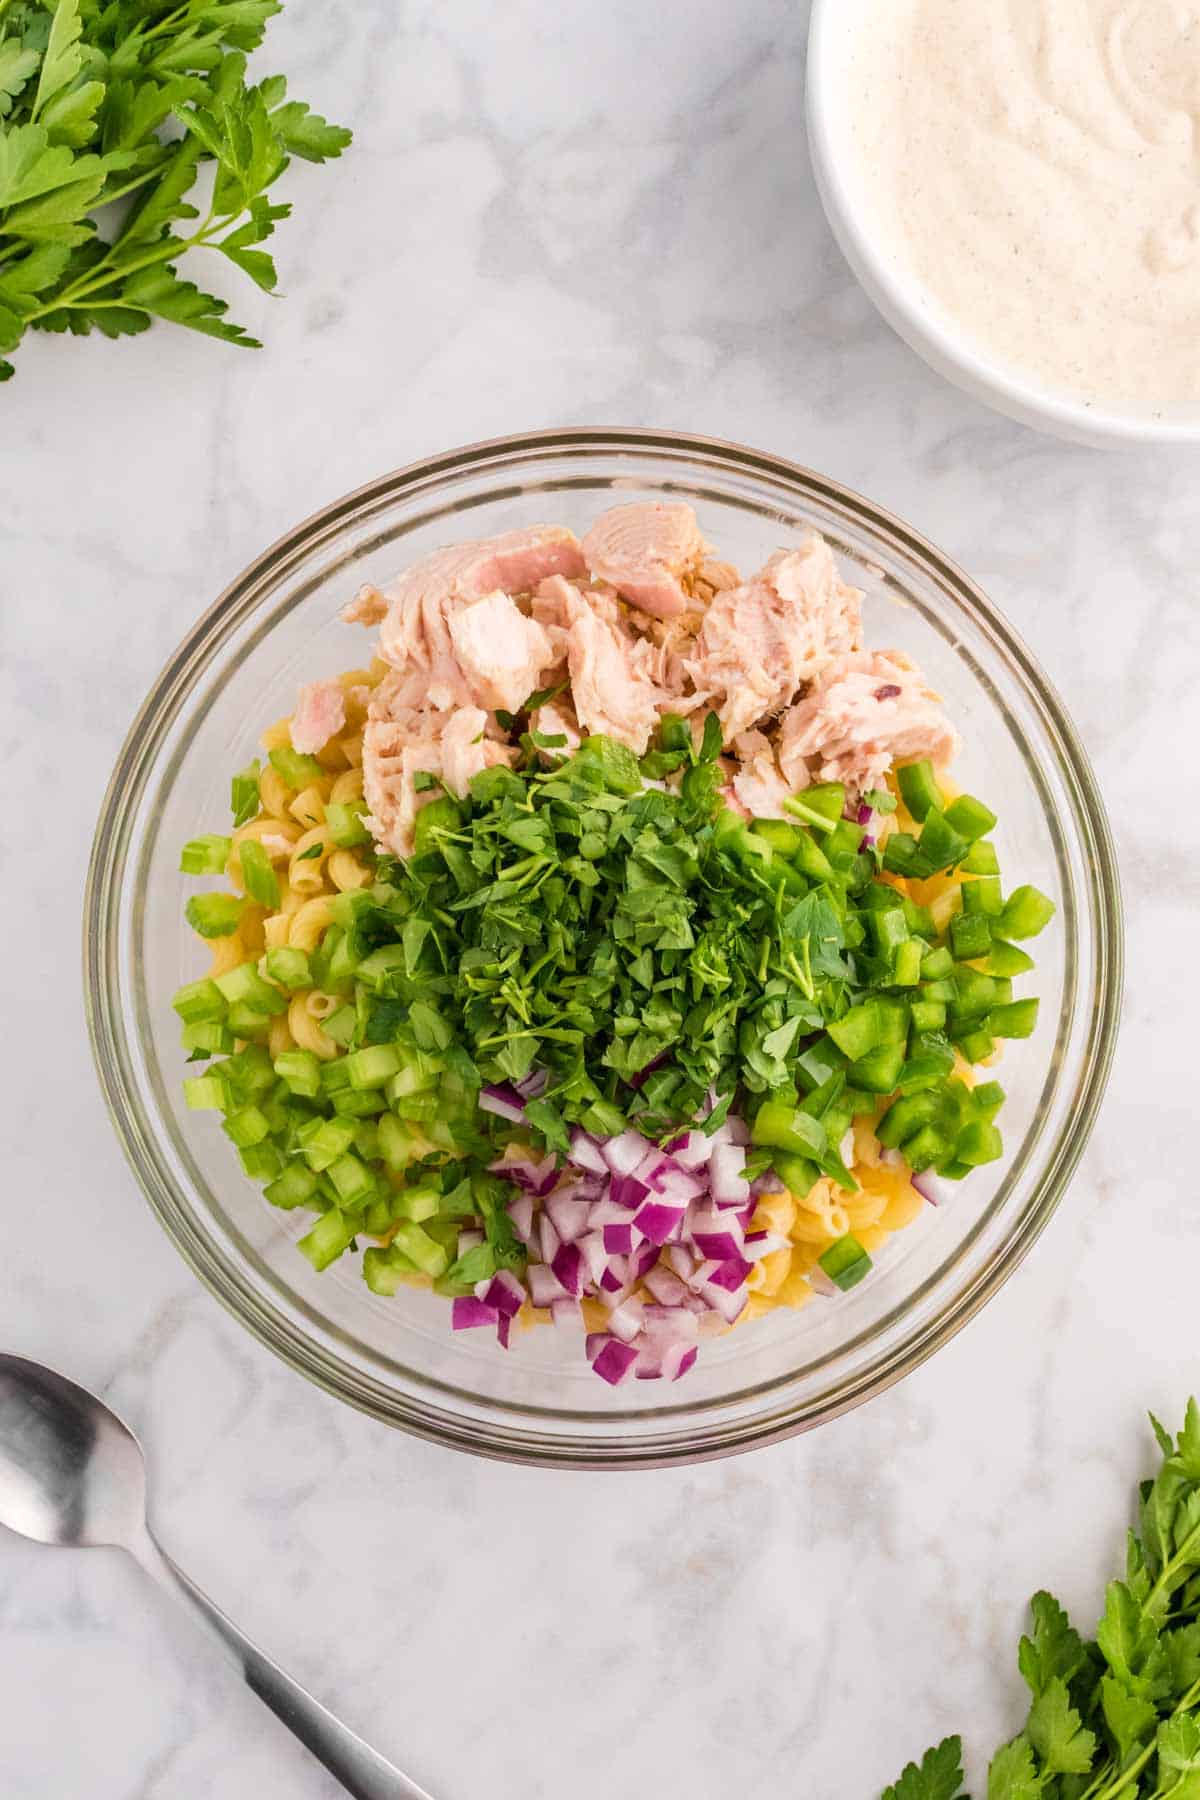 fresh parsley, red onions, celery, green peppers, tuna chunks and macaroni in a bowl